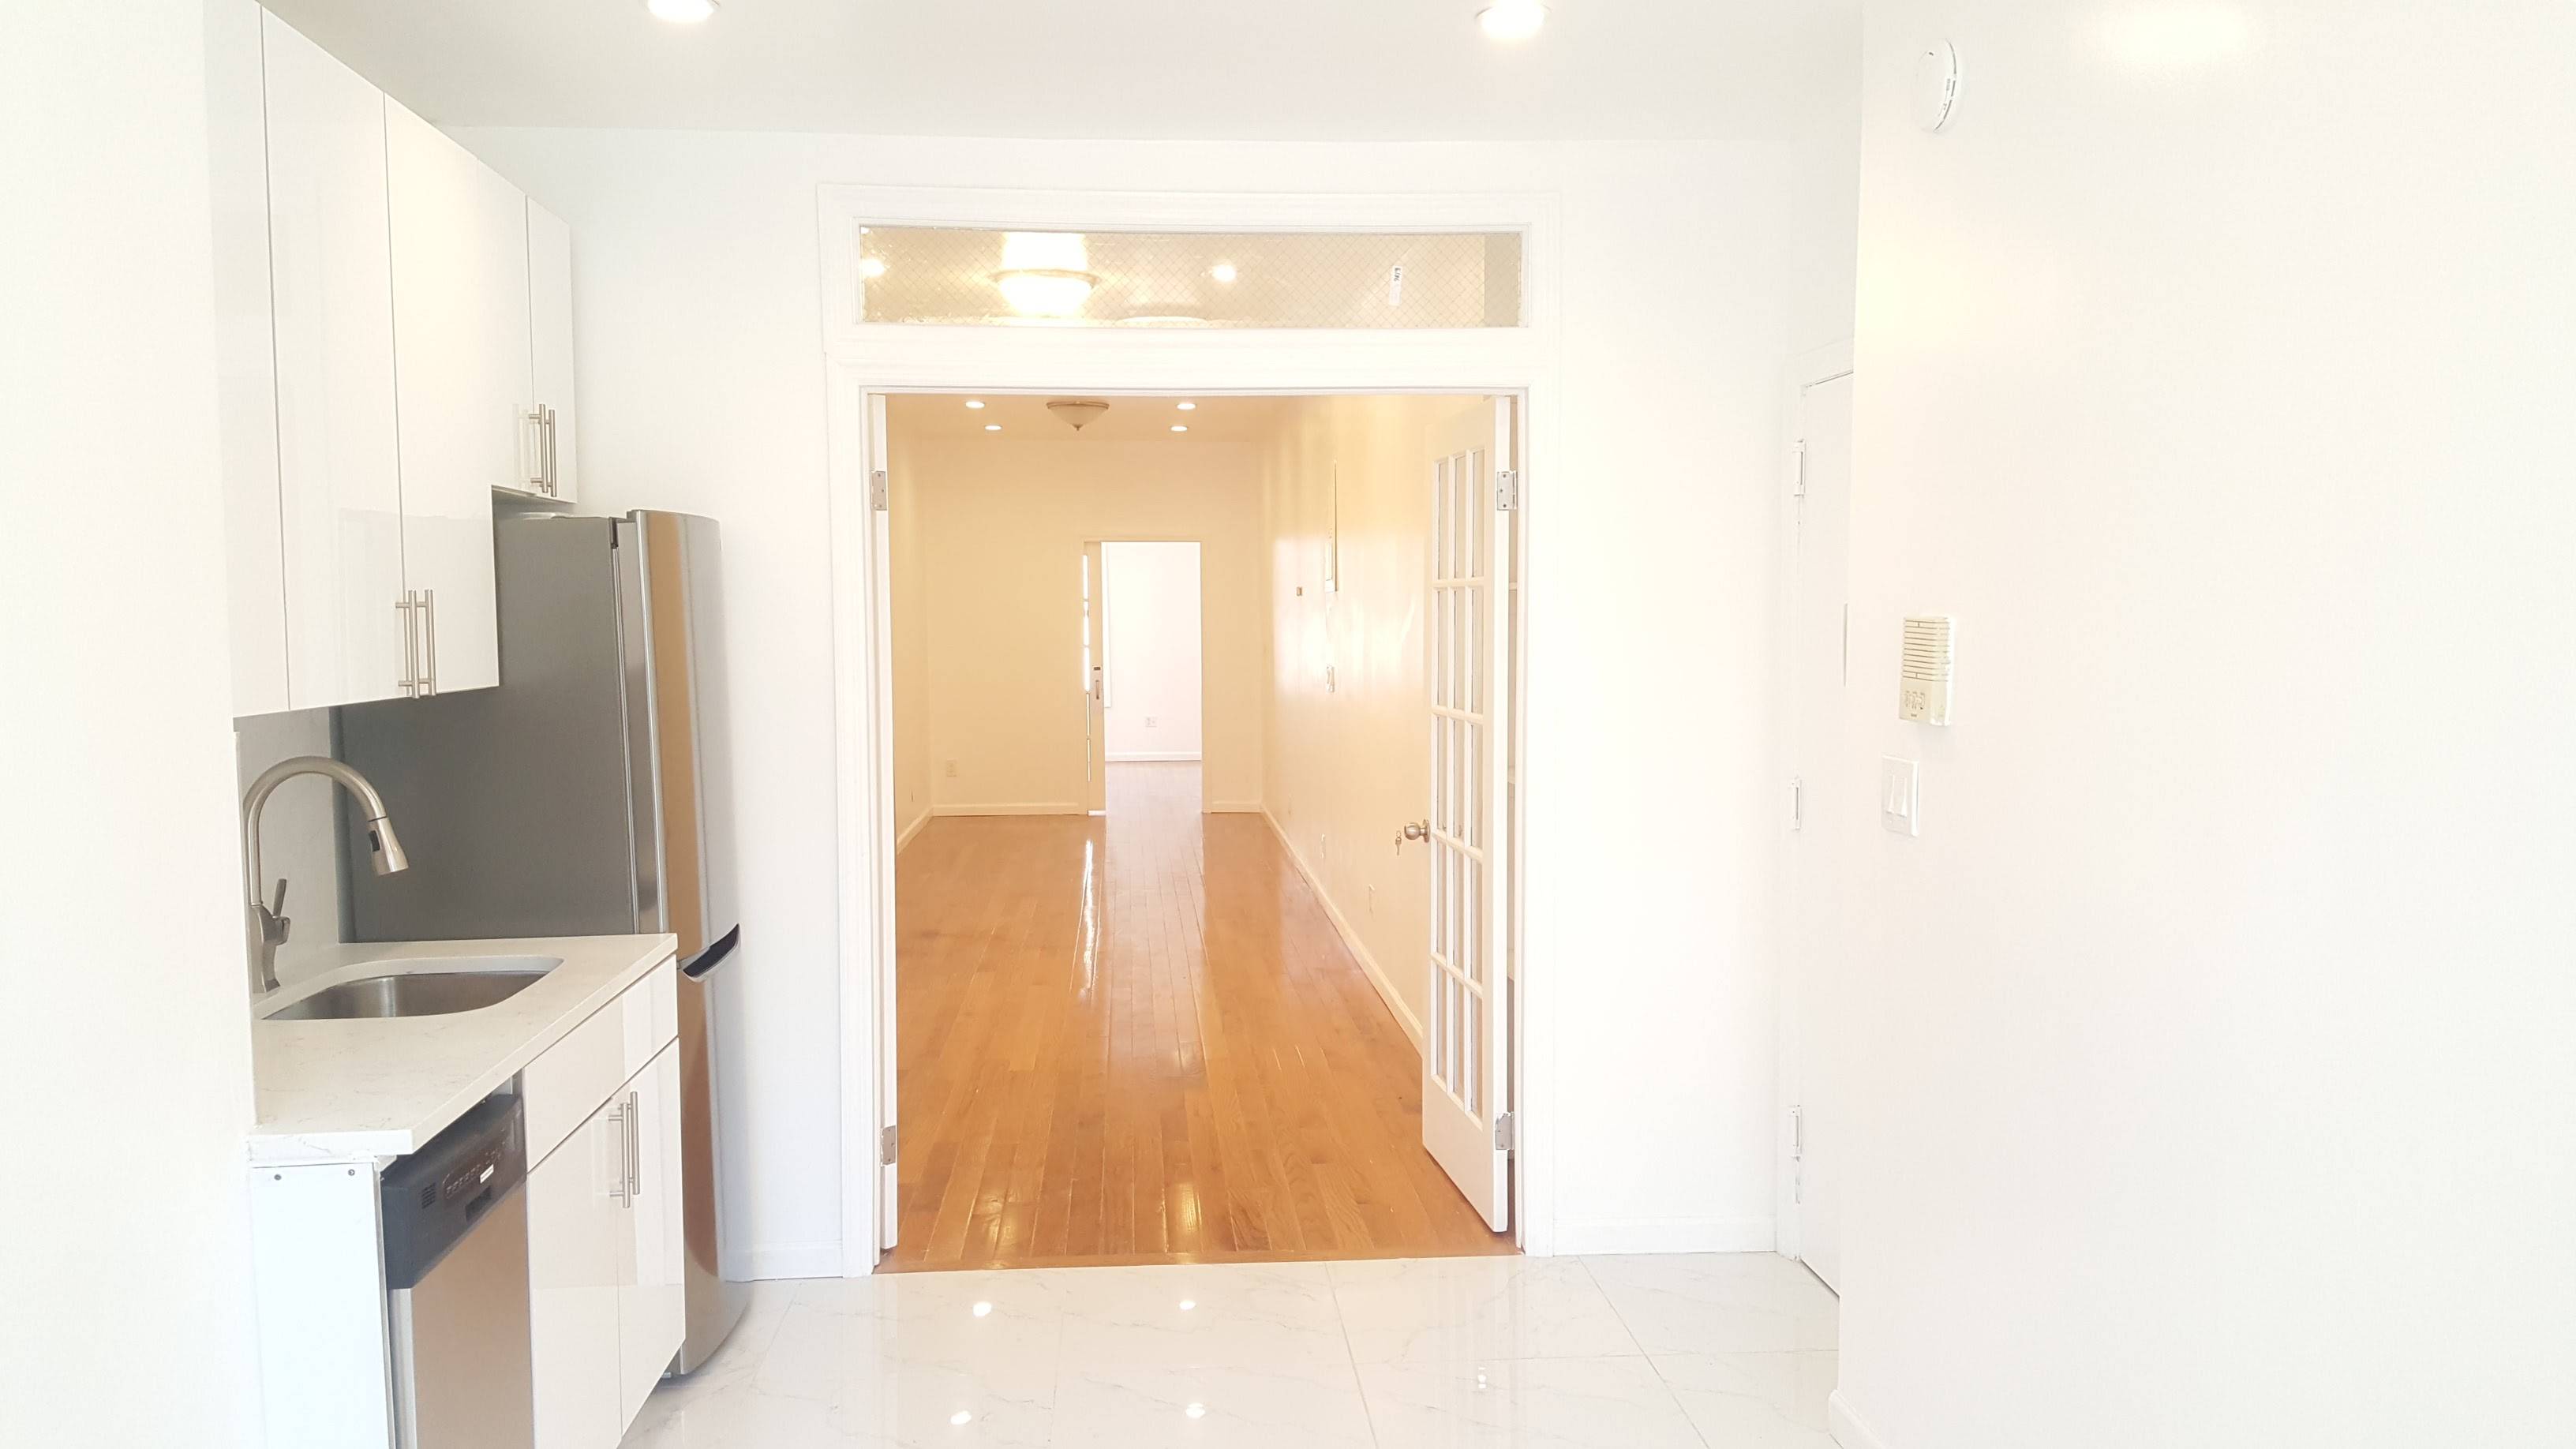 MASSIVE, FULLY RENOVATED, RENT STABILIZED  1BR IN THE HEART OF WILLIAMSBURG!